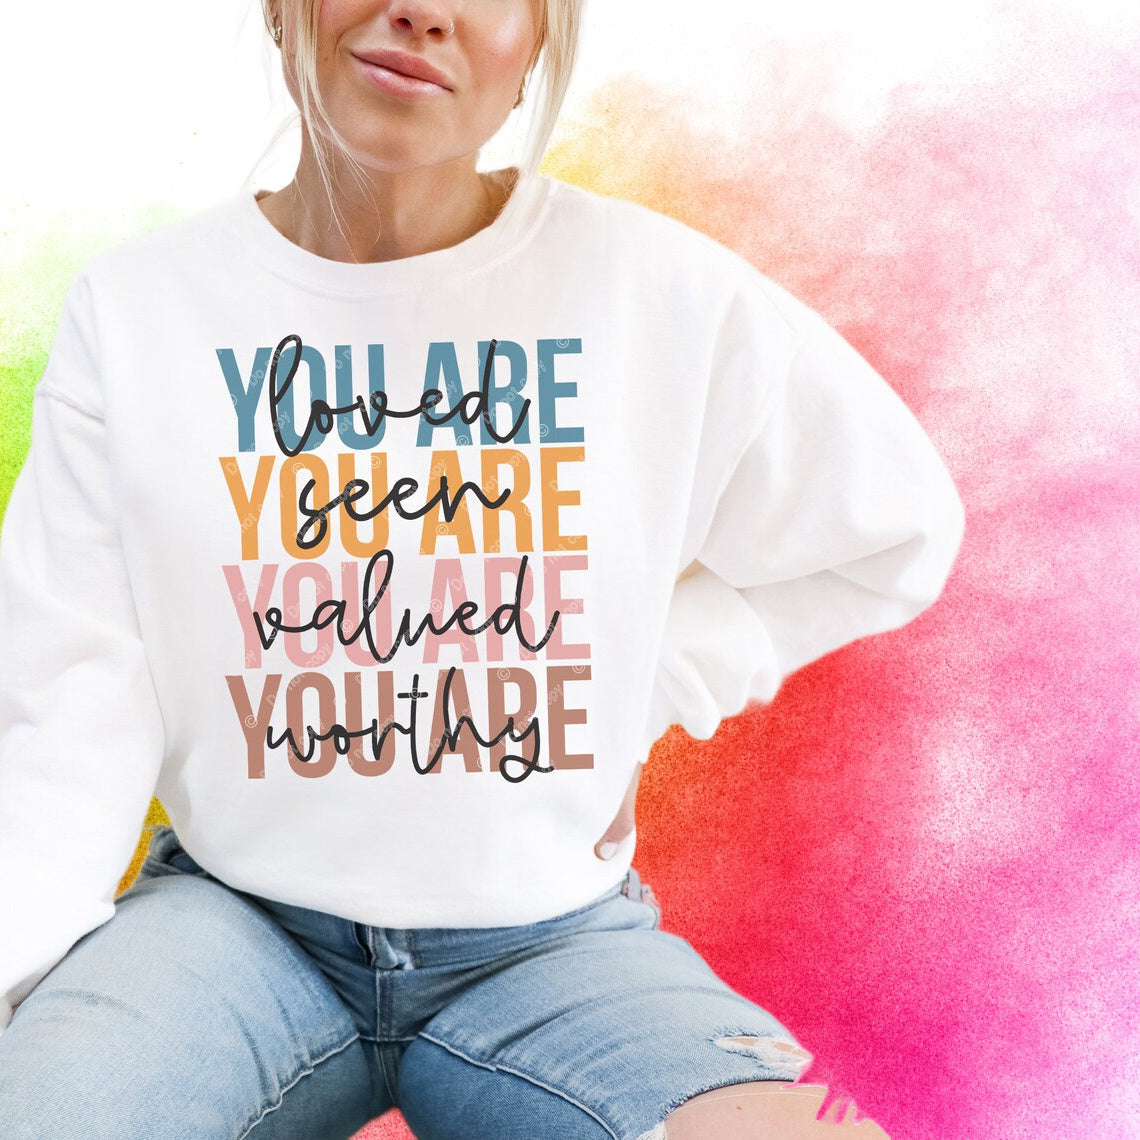 Faith You Are Loved and Seen T-Shirt or Sweatshirt - Original Design for Men and Women